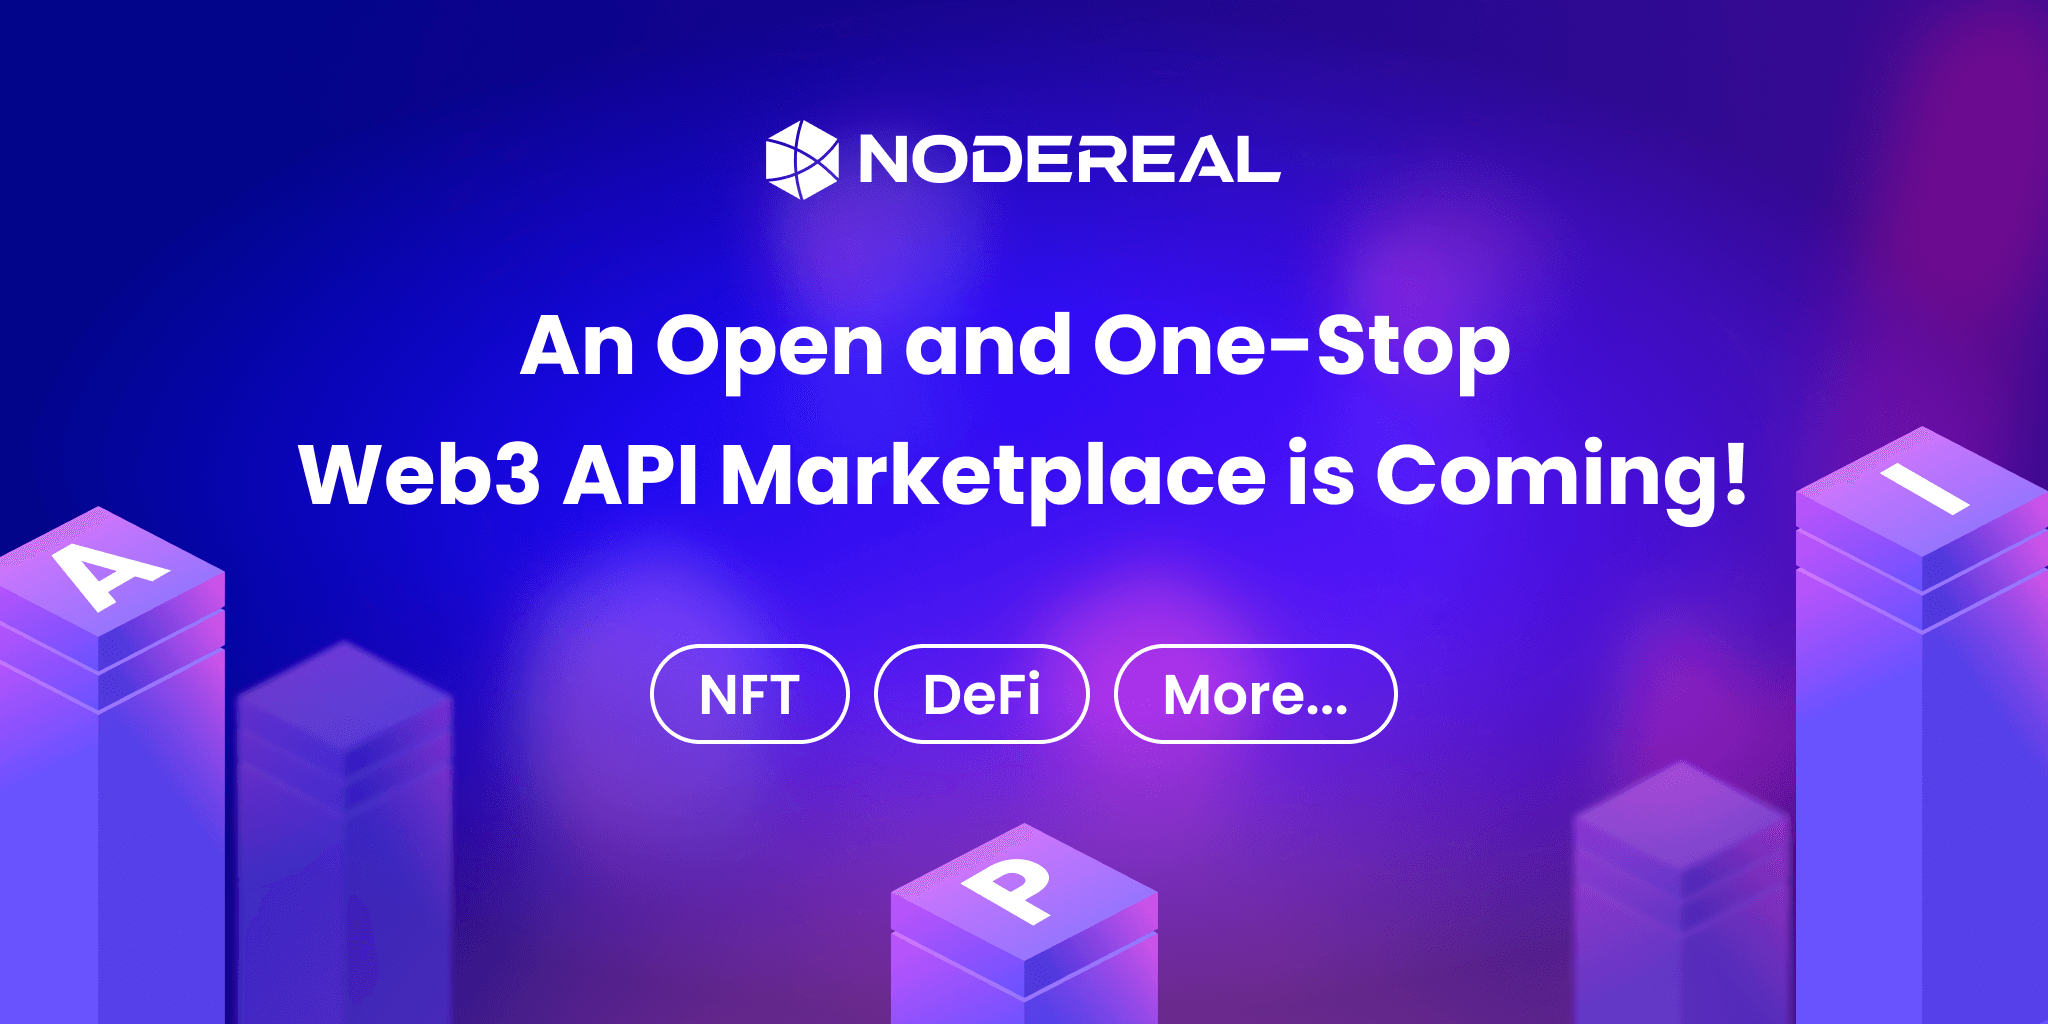 NFT, DeFi, and more: An Open and One-Stop Web3 API Marketplace is Coming!